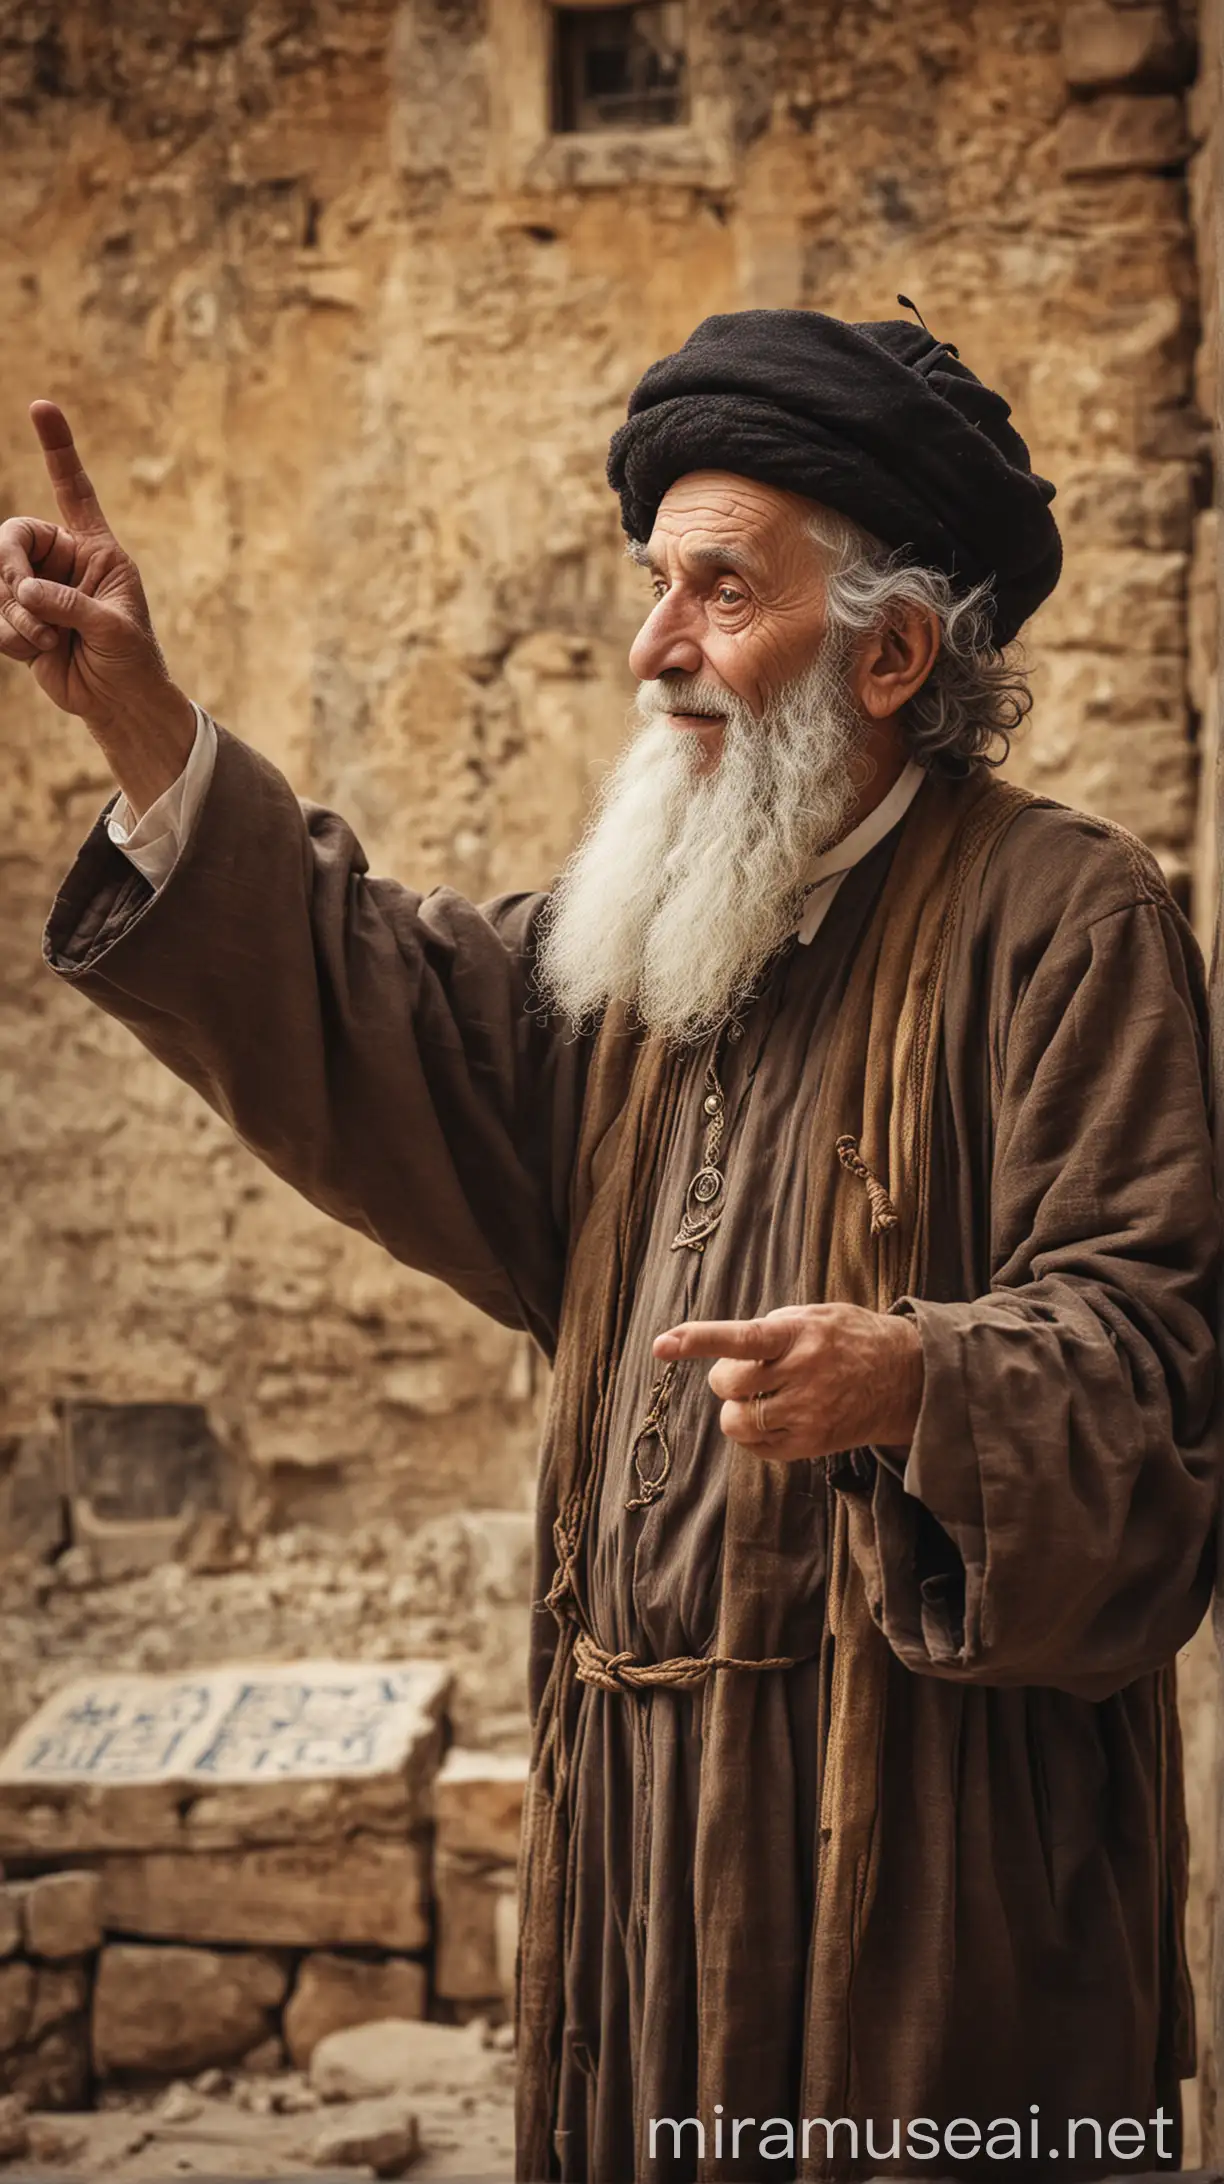 Elderly Jewish Guide Directing Travelers in Ancient Landscape